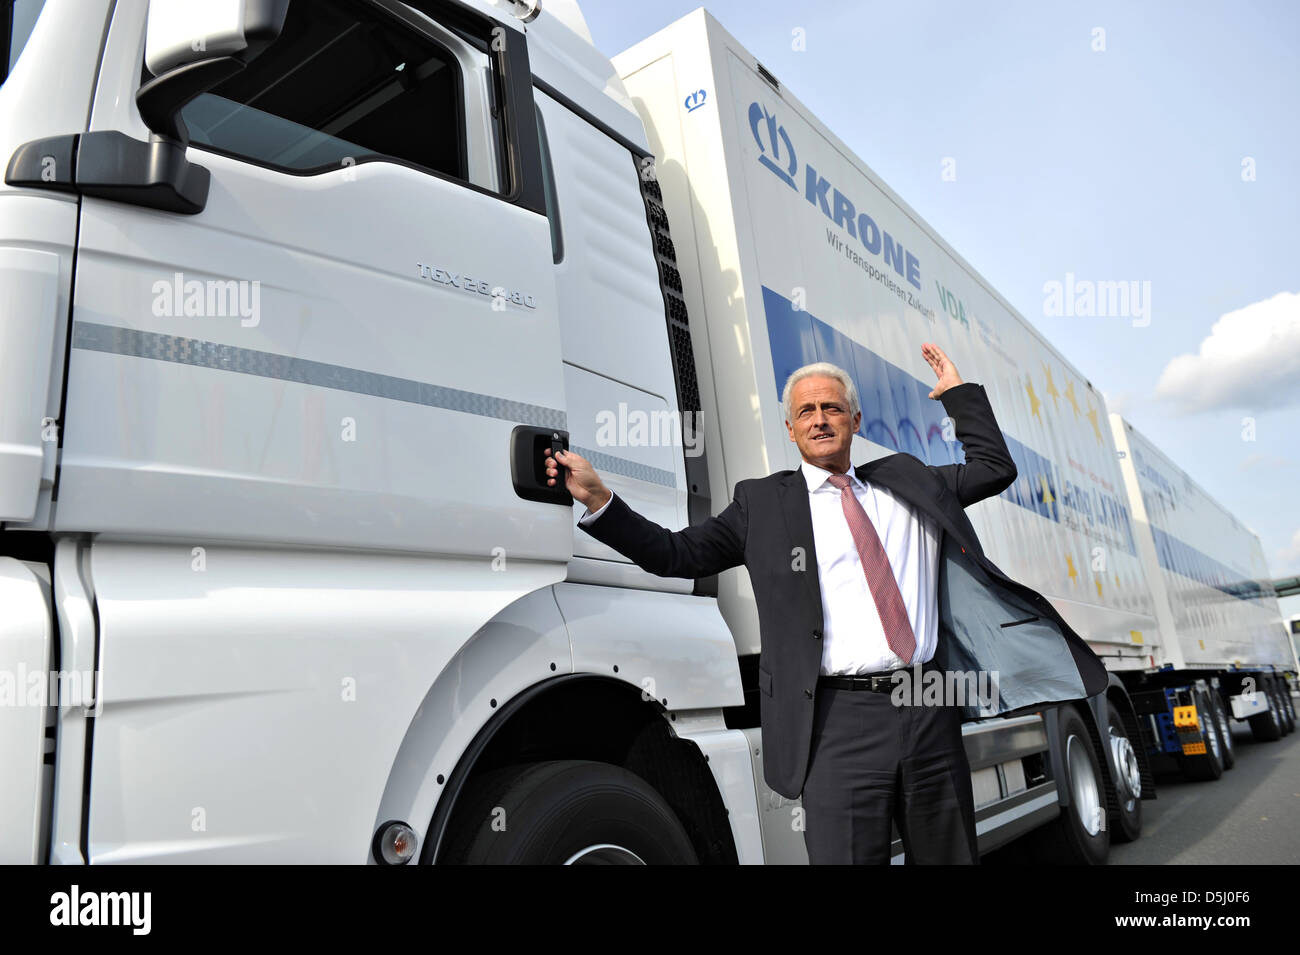 German Minister of Transport Peter Ramsauer (CSU) stands in front of a long truck of company Krone at the International Automobile Exhibition (IAA) Commercial Vehicles in Hanover, Germany, 20 September 2012. 1904 exhibitors are presenting their novelties from 20 till 27 September 2012 at the trade show. Photo: EMILY WABITSCH Stock Photo